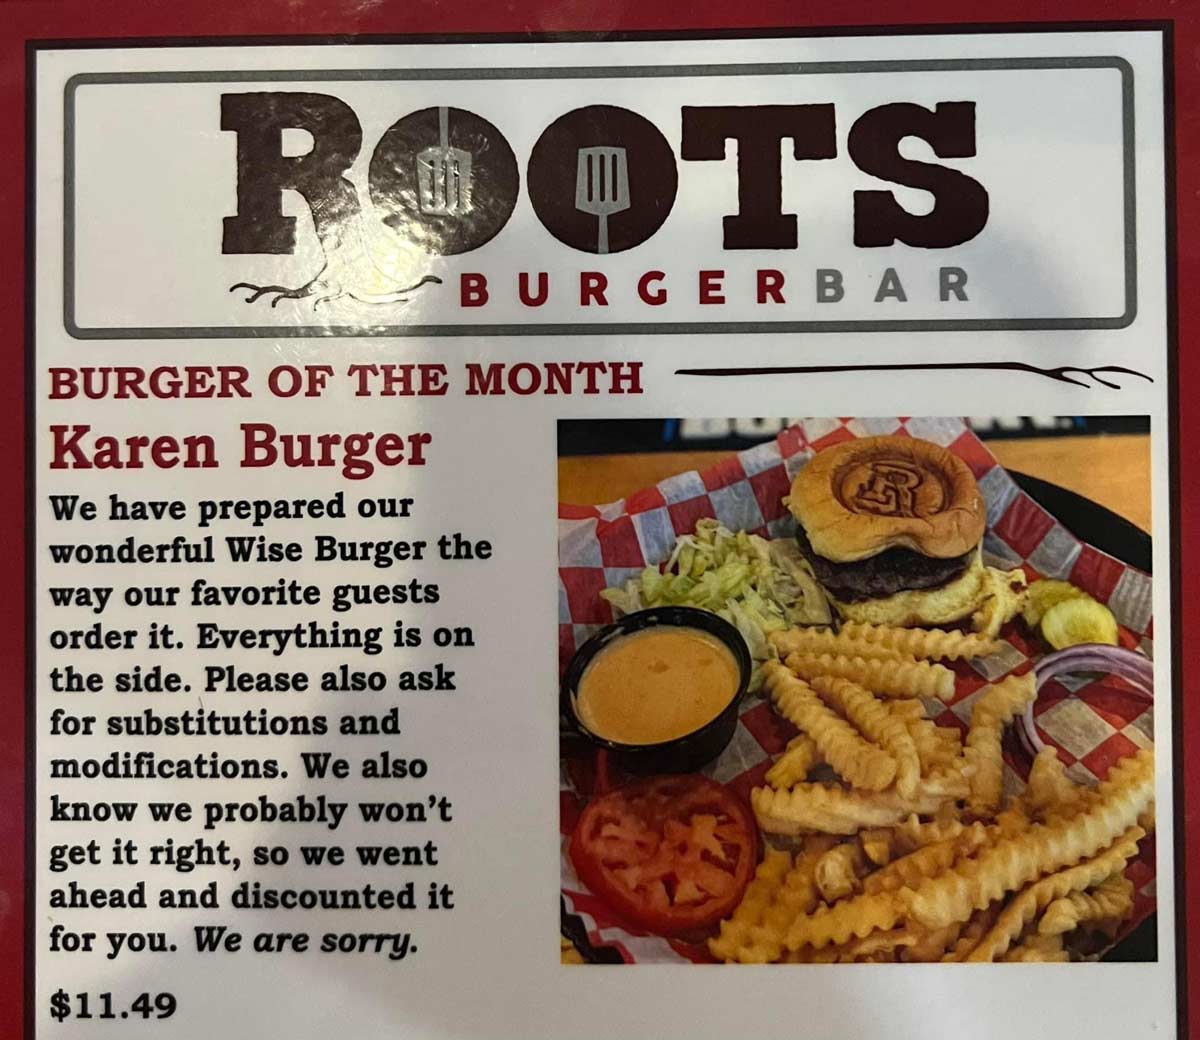 dank memes - junk food - Roots Burgerbar Burger Of The Month Karen Burger We have prepared our wonderful Wise Burger the way our favorite guests order it. Everything is on the side. Please also ask for substitutions and modifications. We also know we prob